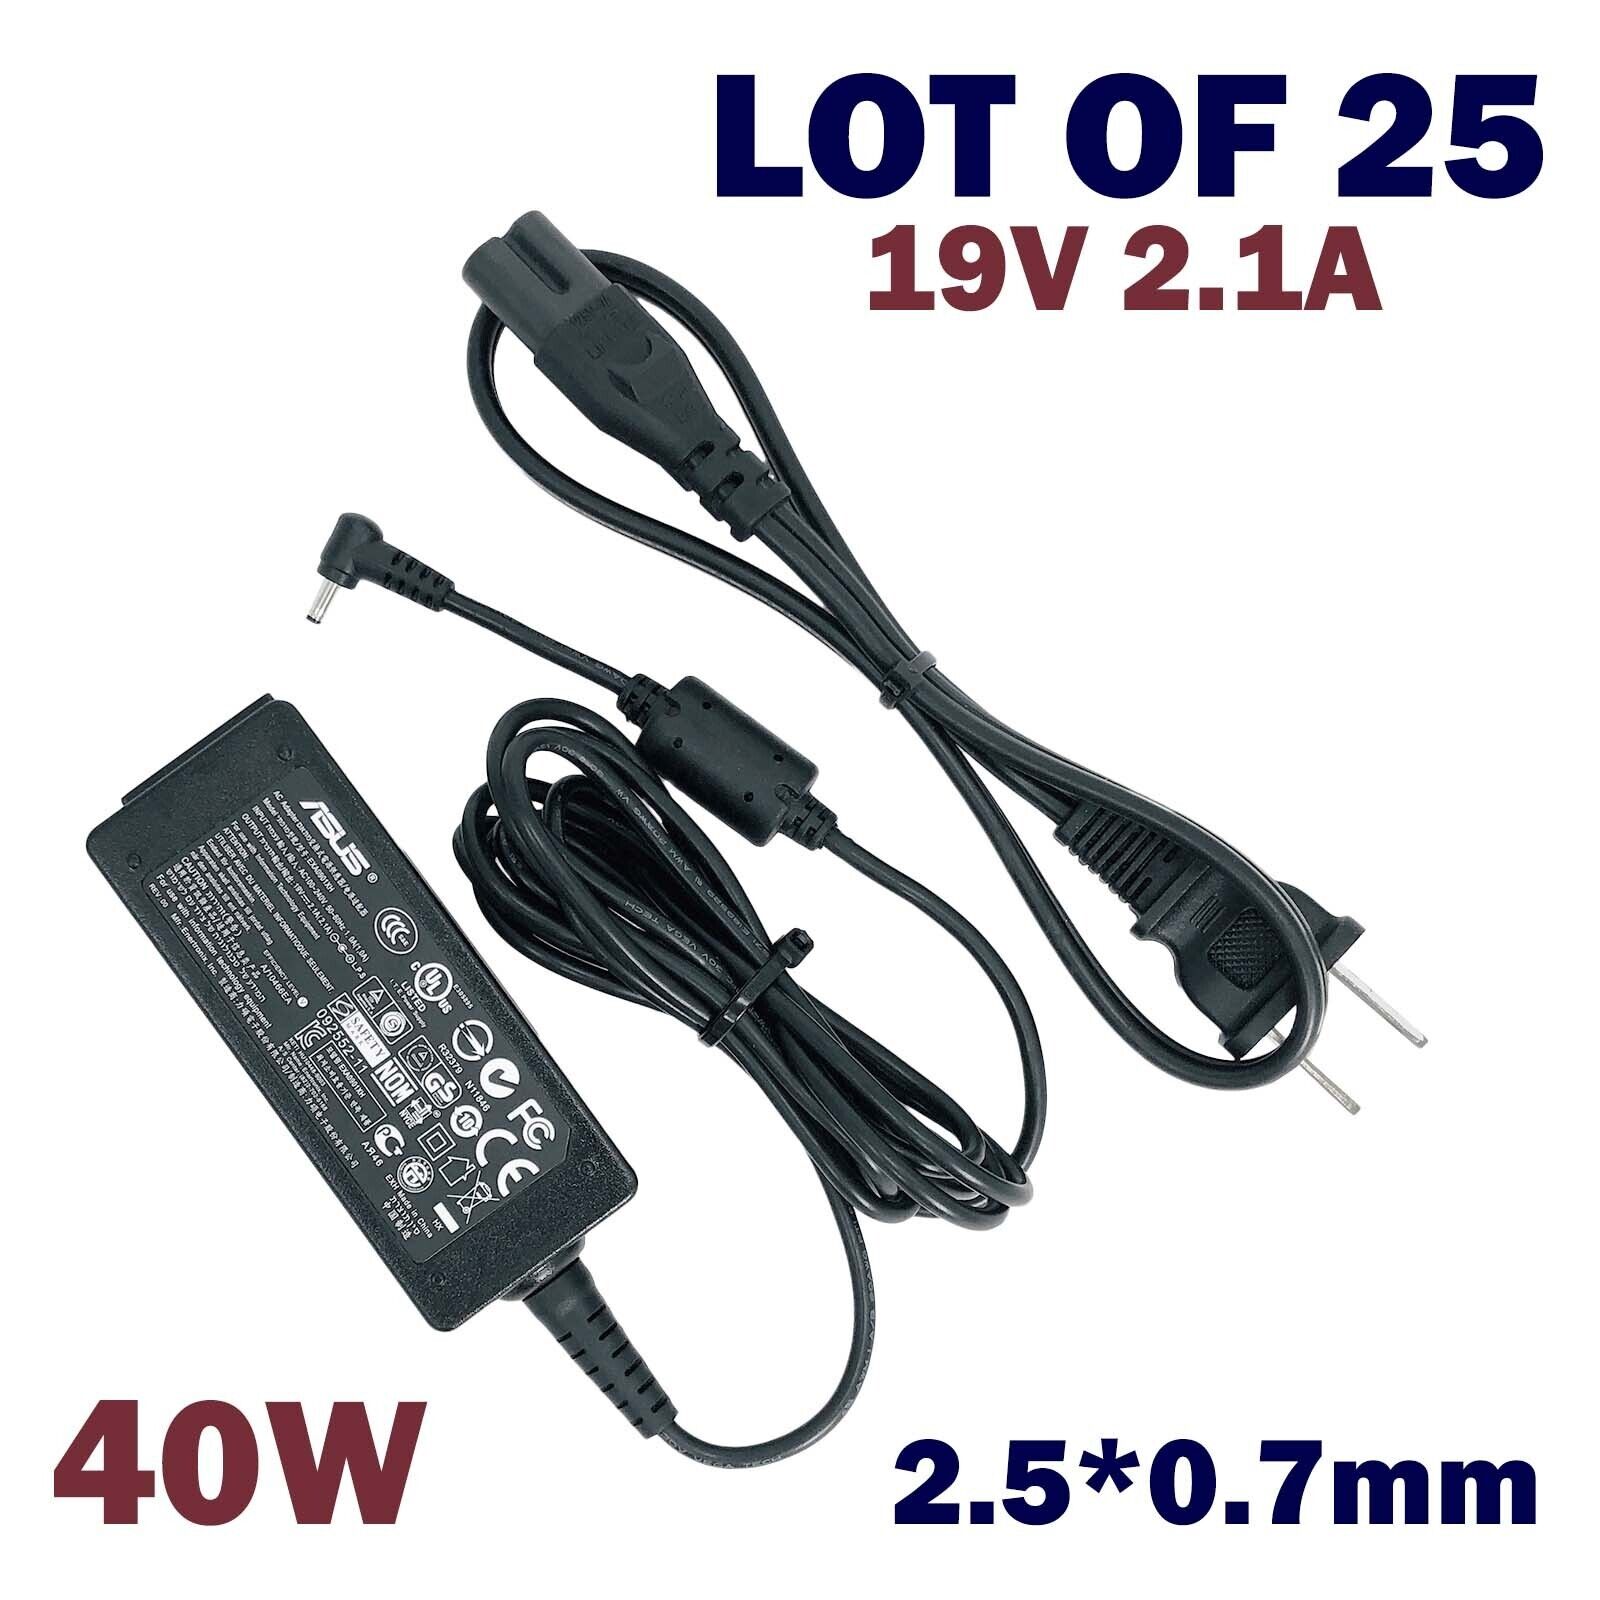 Lot of 25 Original 40W Asus AC Adapter Power Supply 19V 2.1A 2.5*0.7mm w/Cord